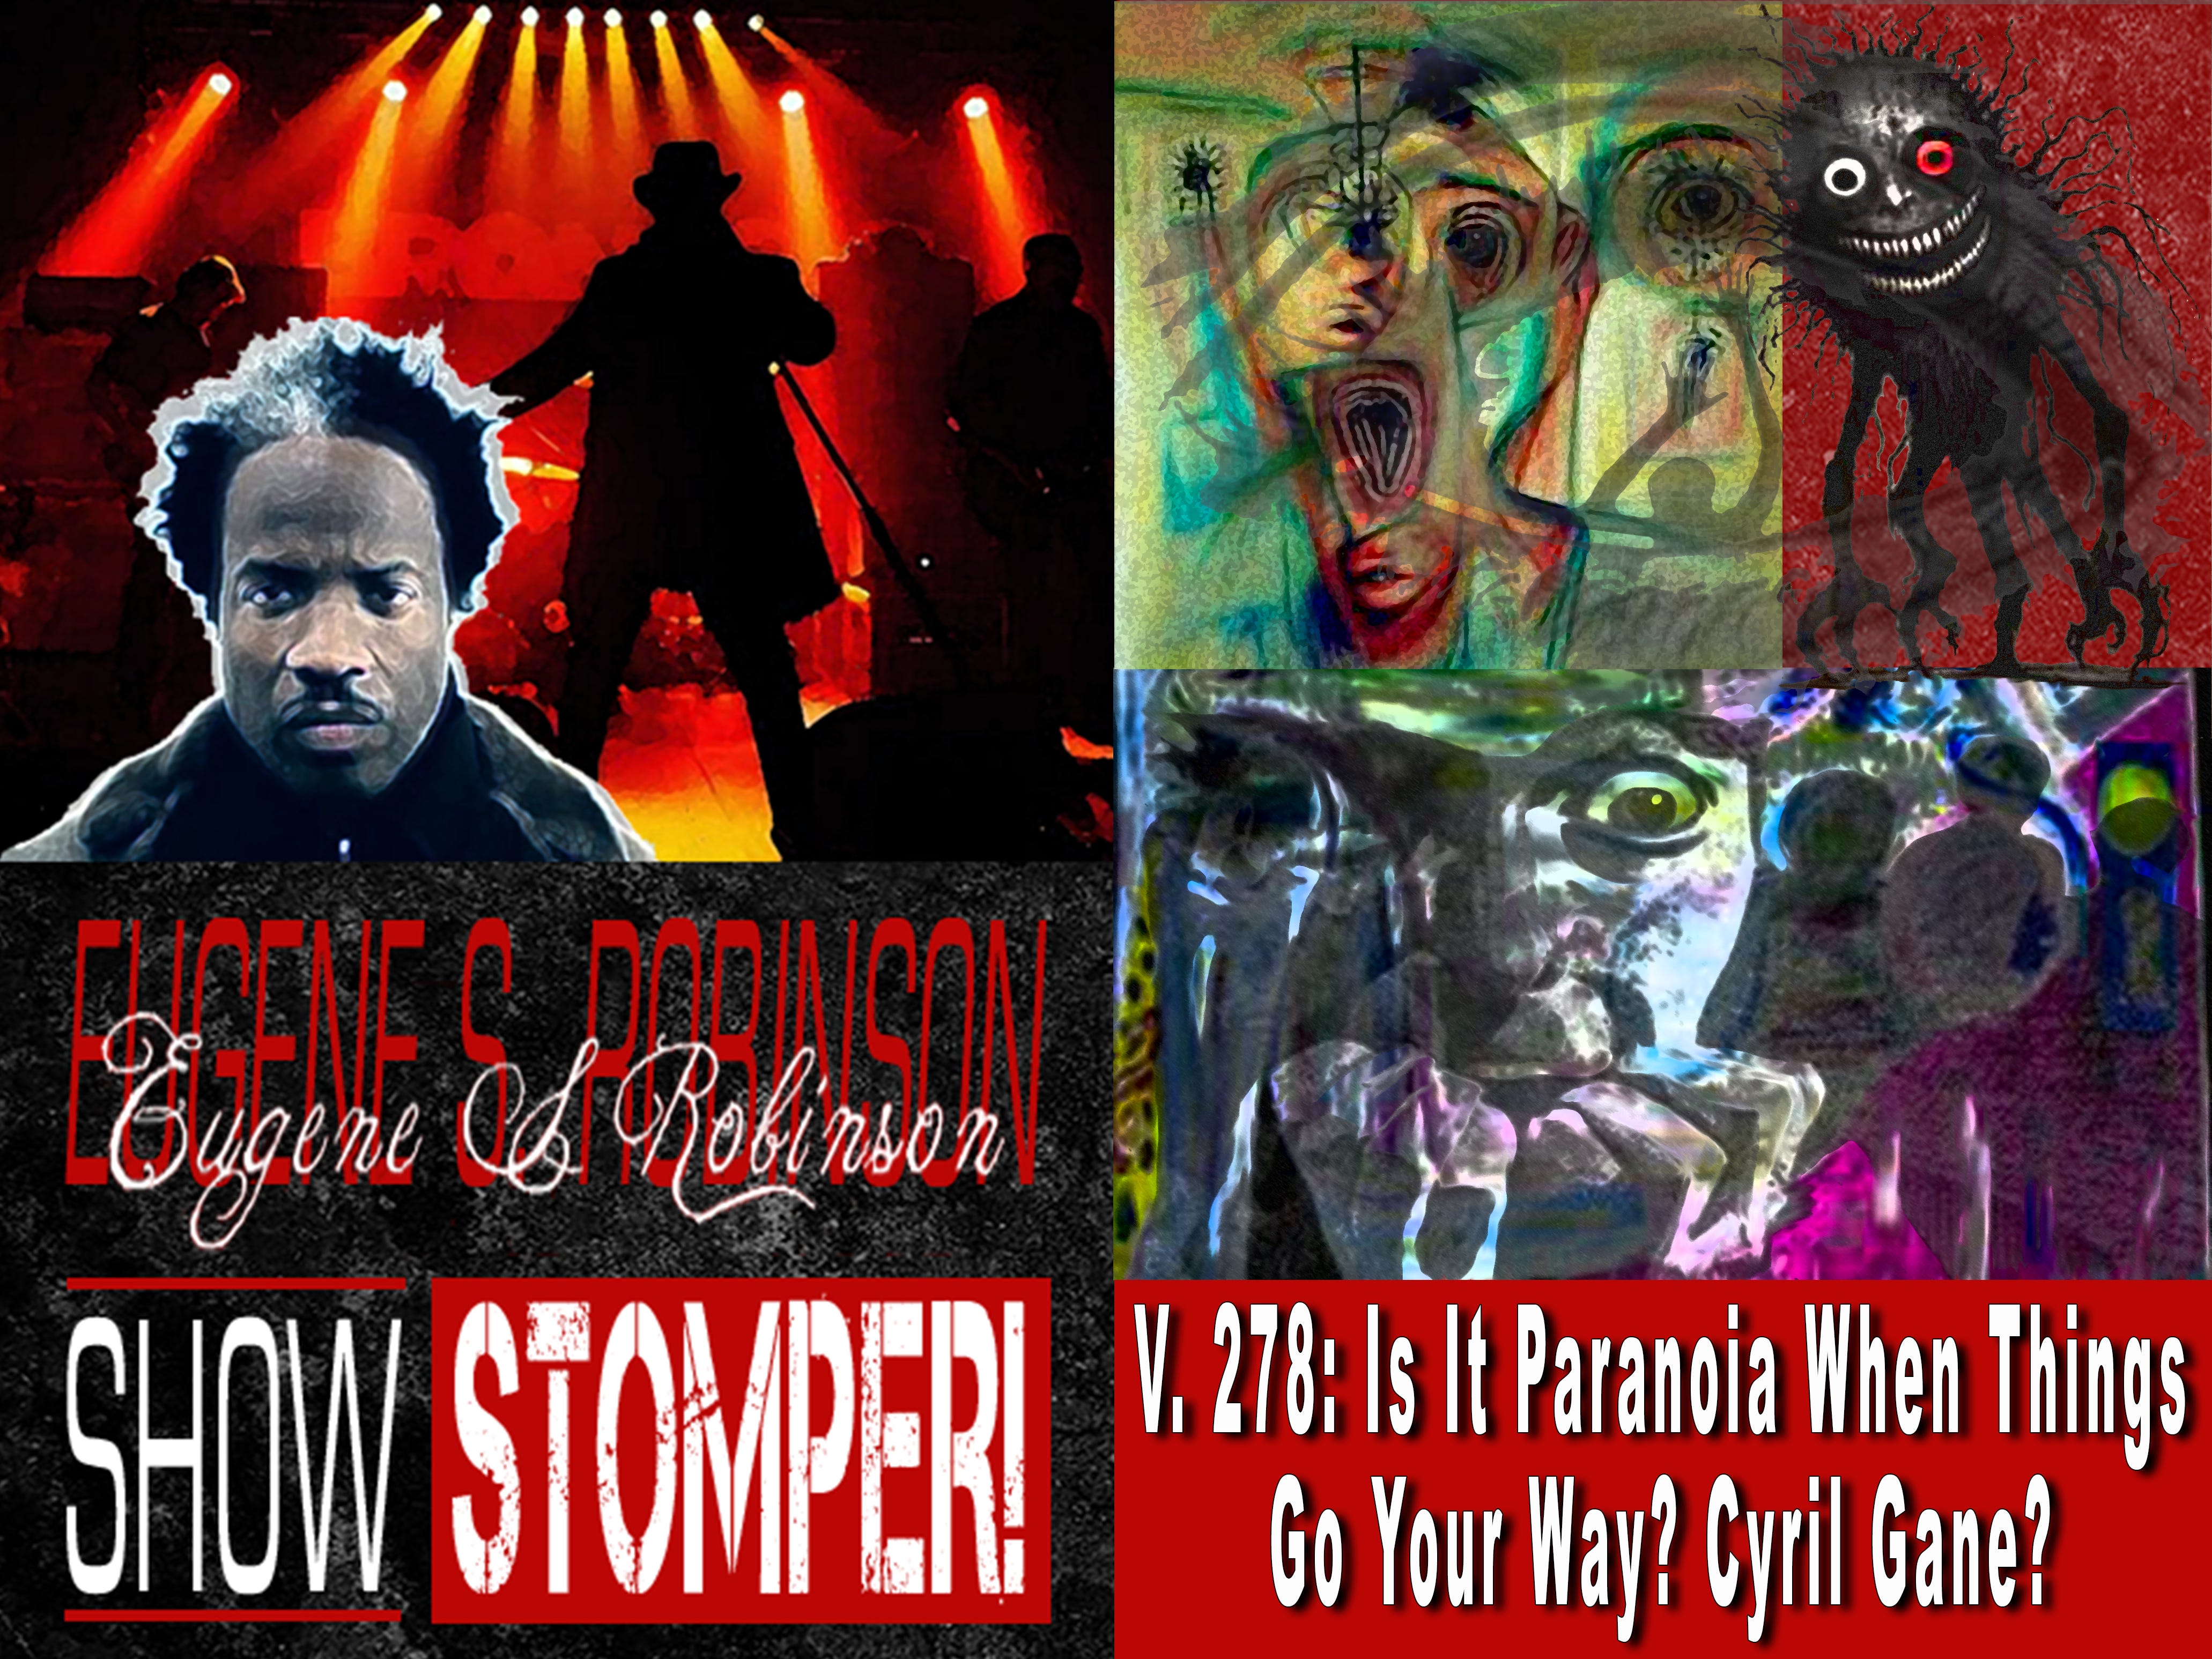 V. 278: Is It Paranoia When Things Go Your Way? Cyril Gane? On The Eugene S. Robinson Show Stomper!